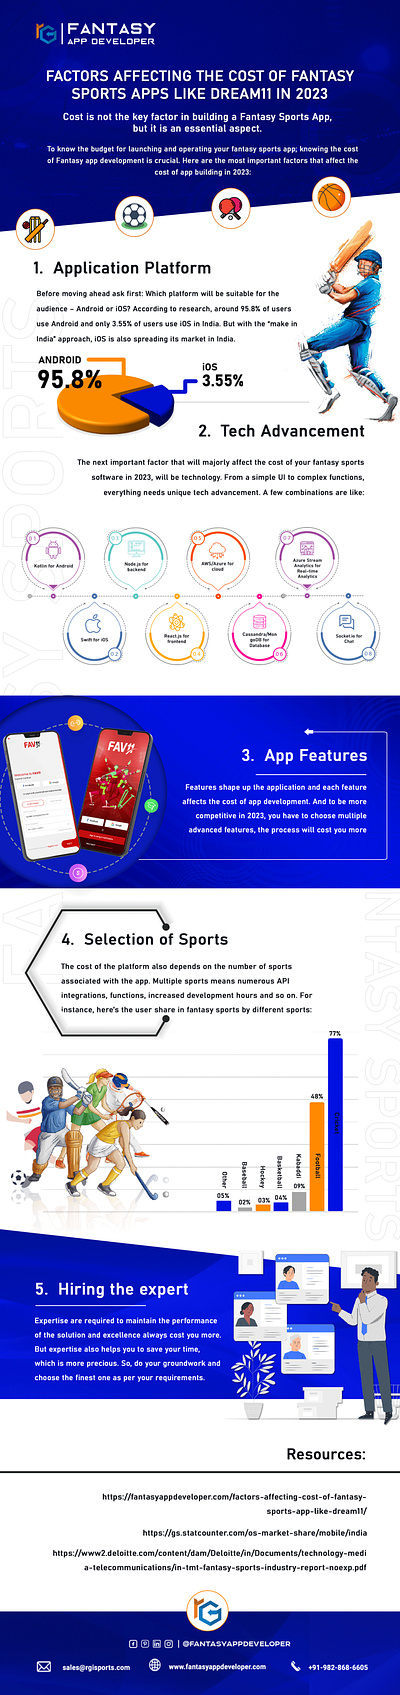 FACTOR AFFECTING COST OF FANTASY SPORTS APP LIKE DREAM11 IN 2023 adroid android app development best video development services design digital marketing digital marketing services illustration logo mobile app development web development